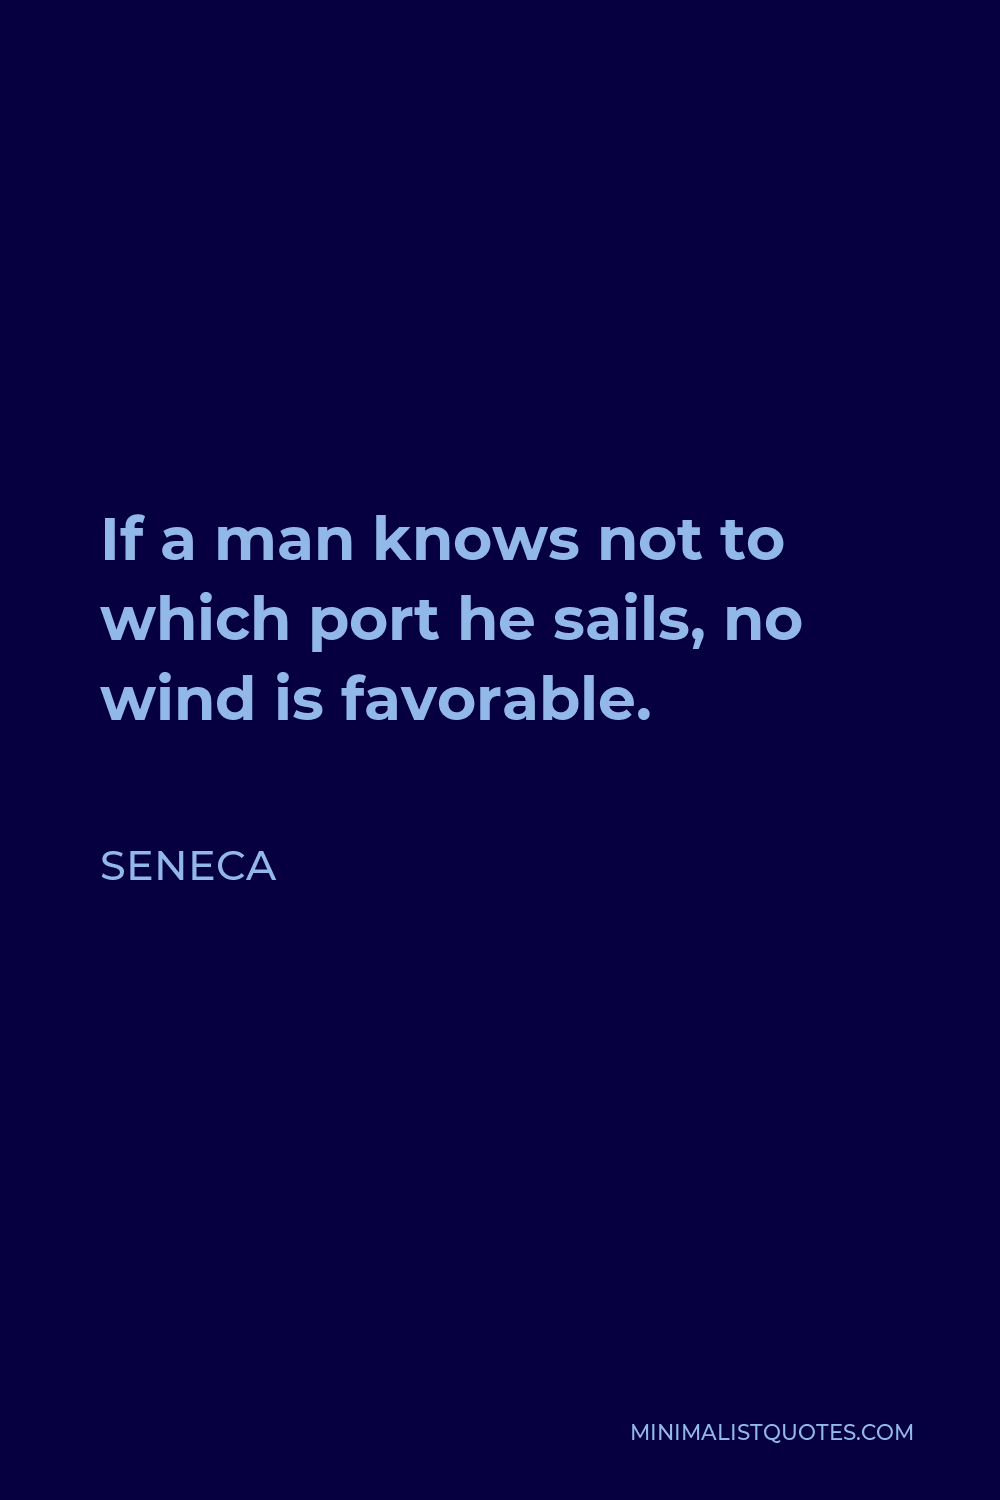 Seneca Quote - If a man knows not to which port he sails, no wind is favorable.